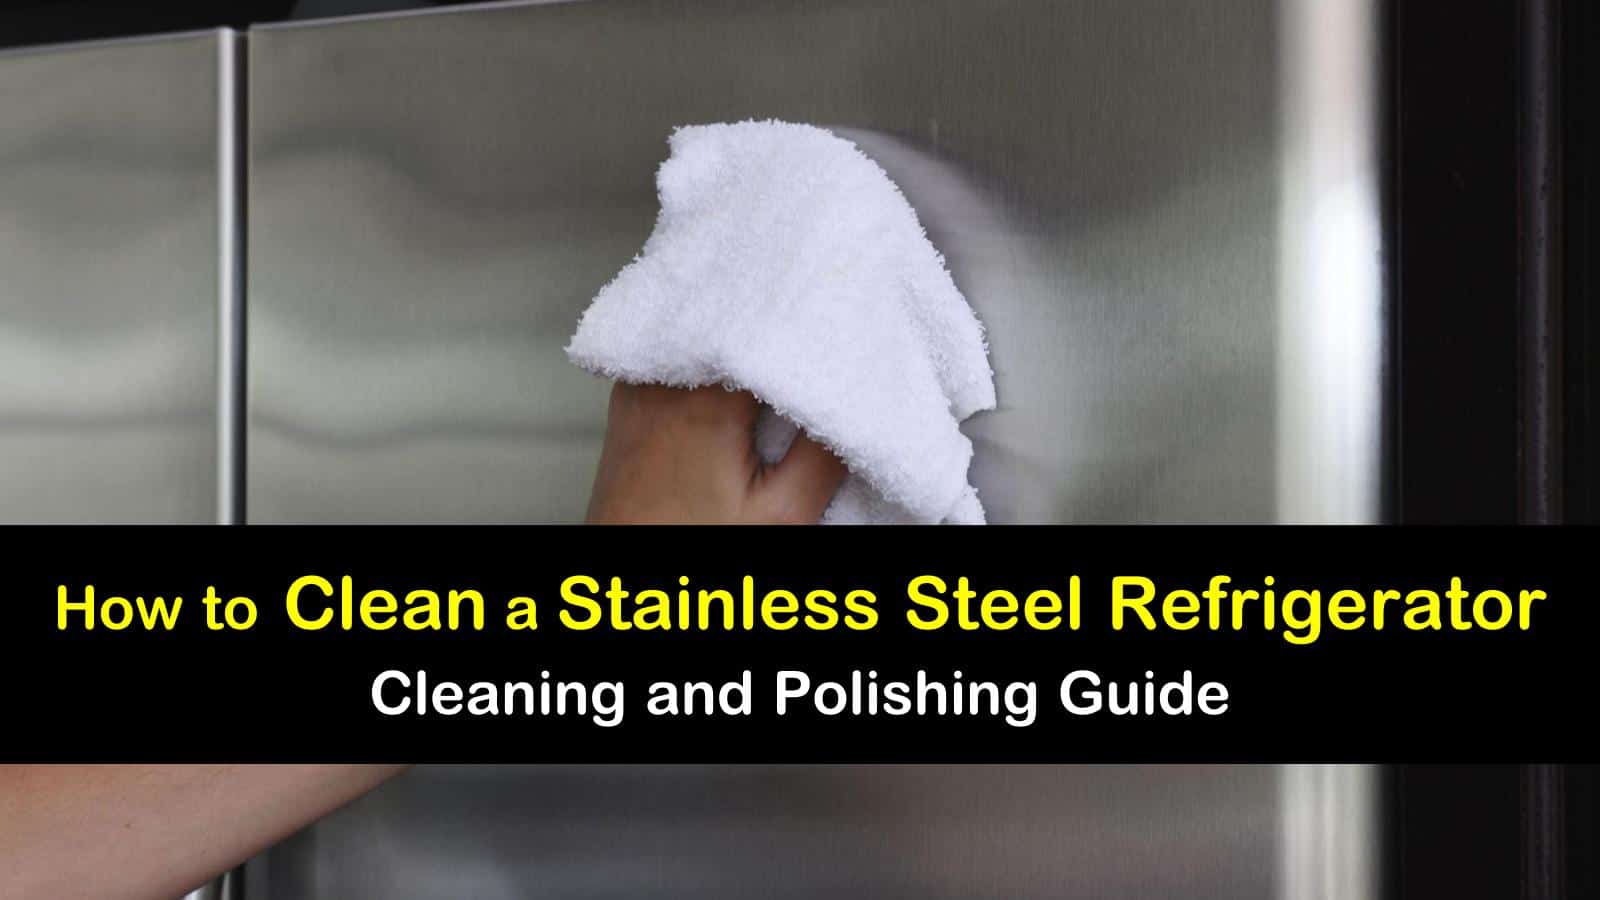 how to clean a stainless steel refrigerator titleimg1